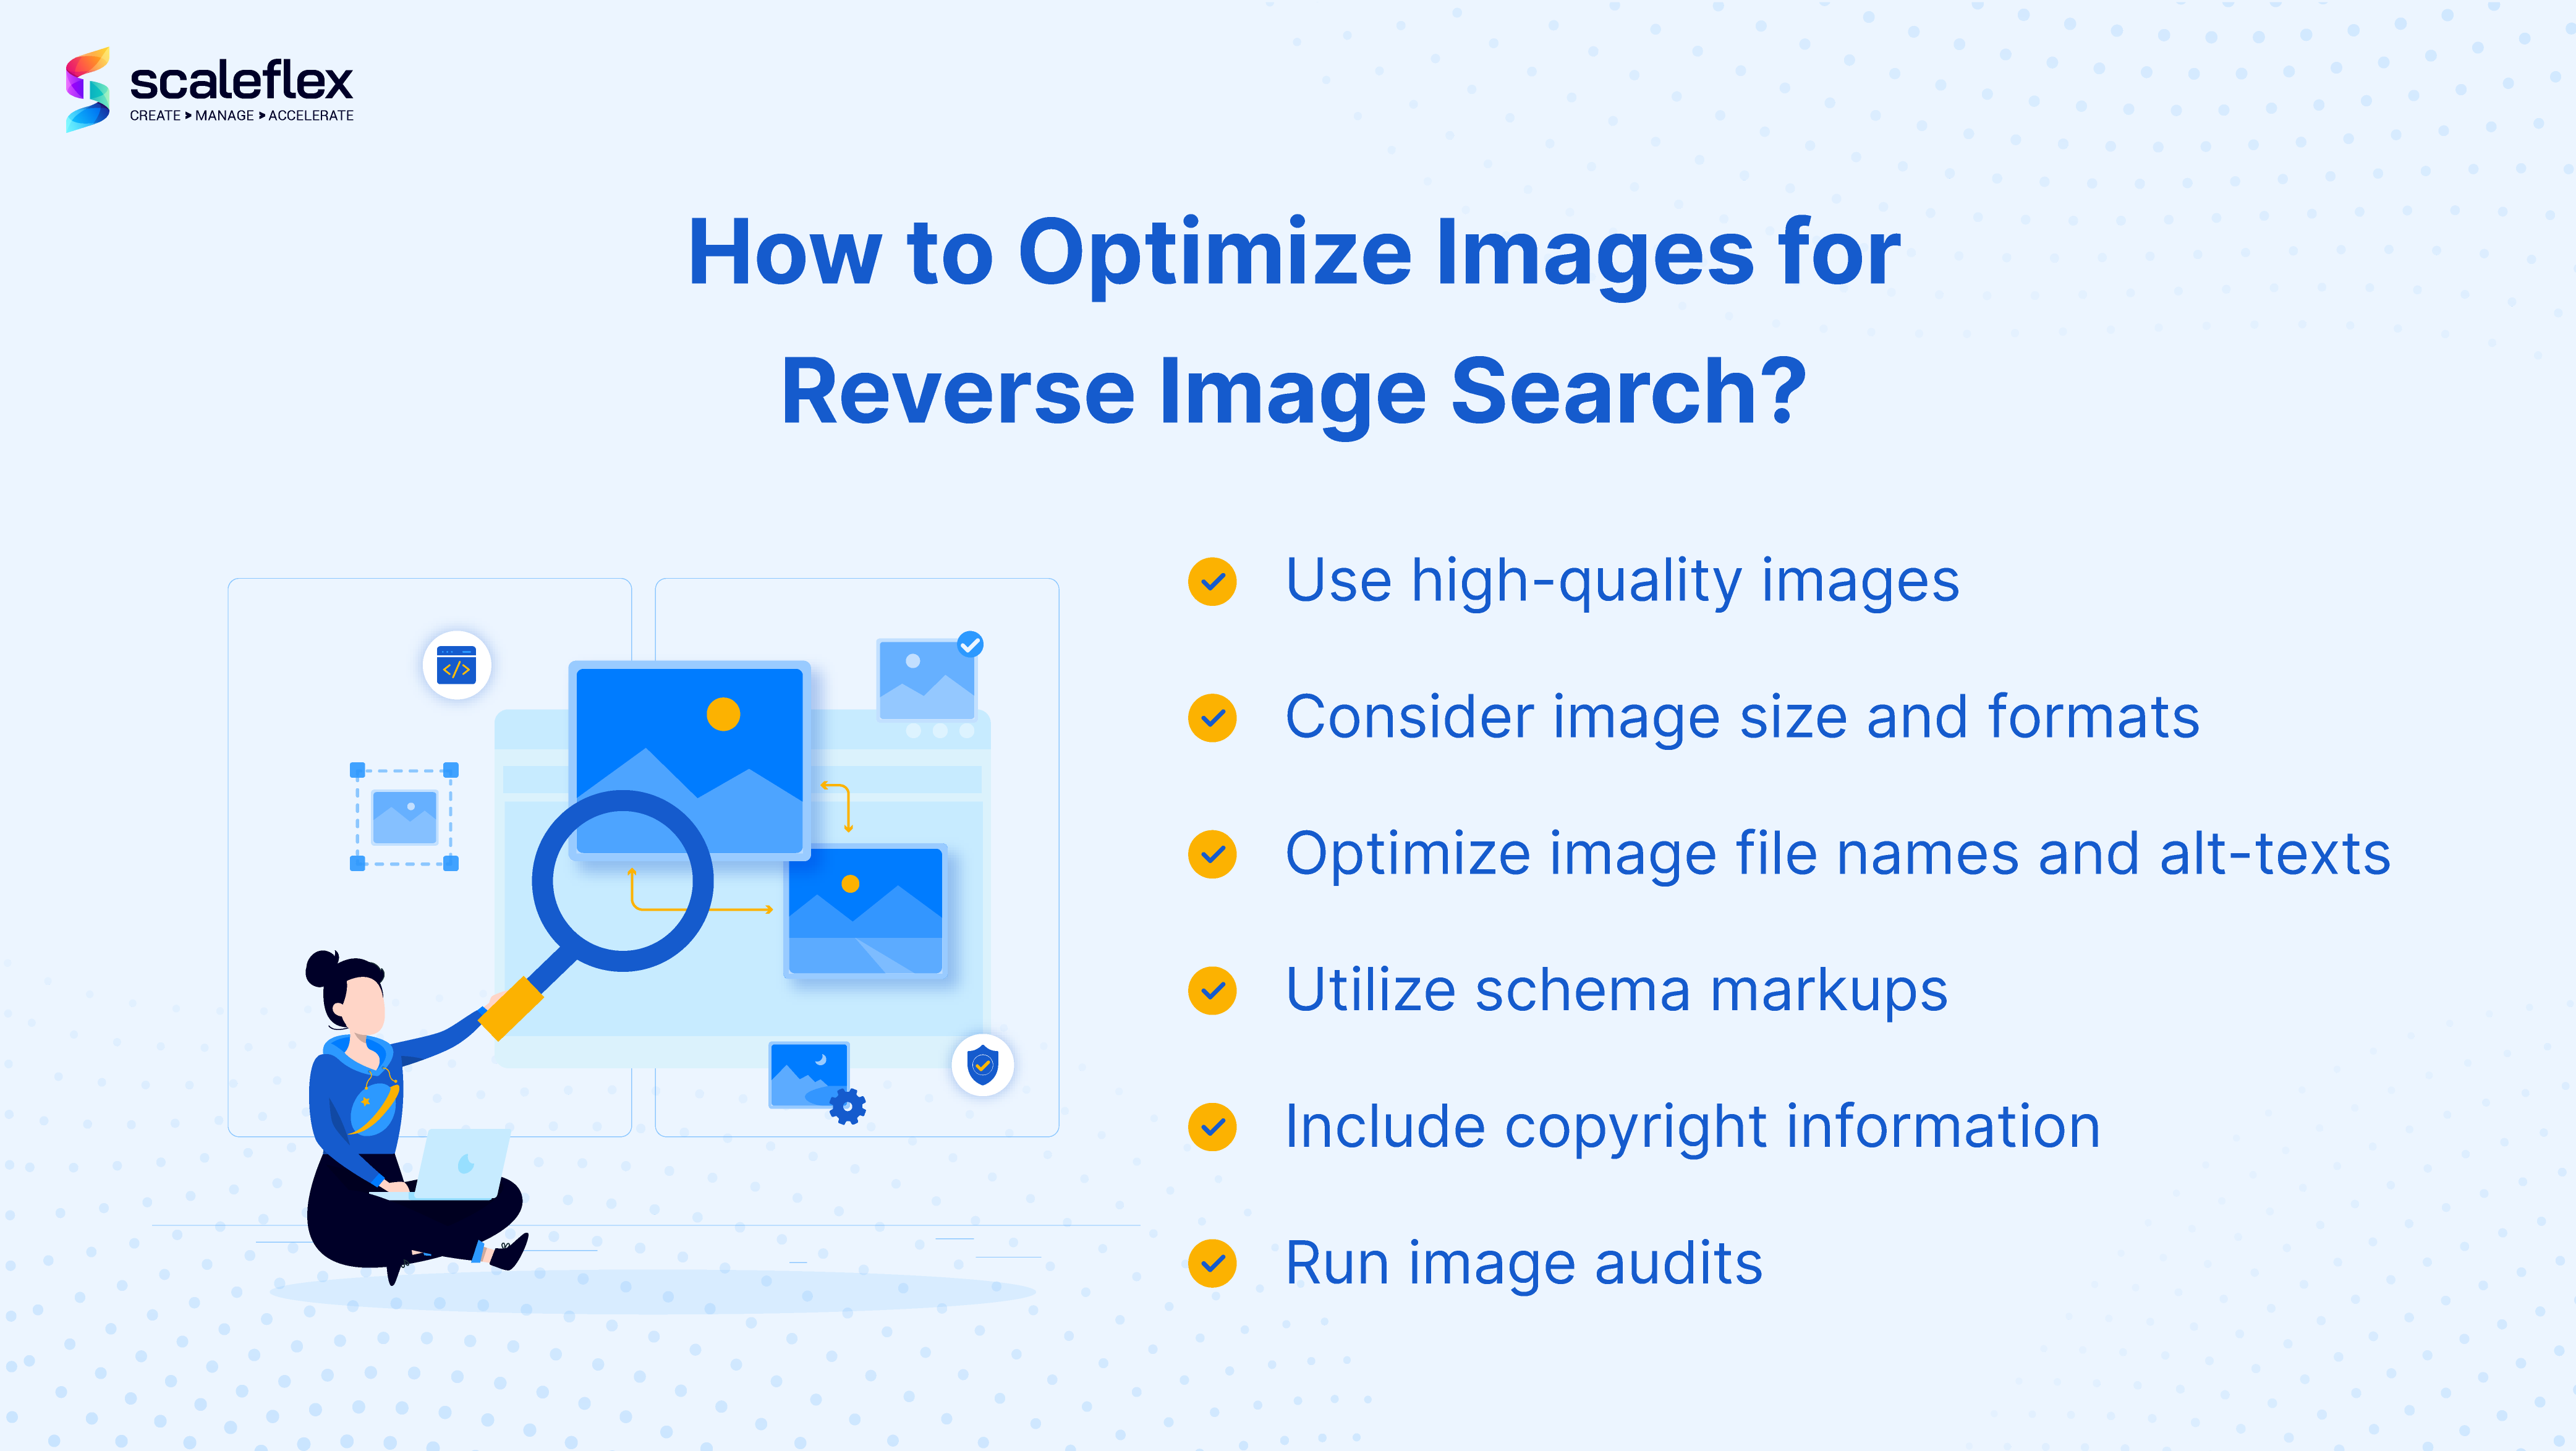 Ways to optimize images for reverse image search